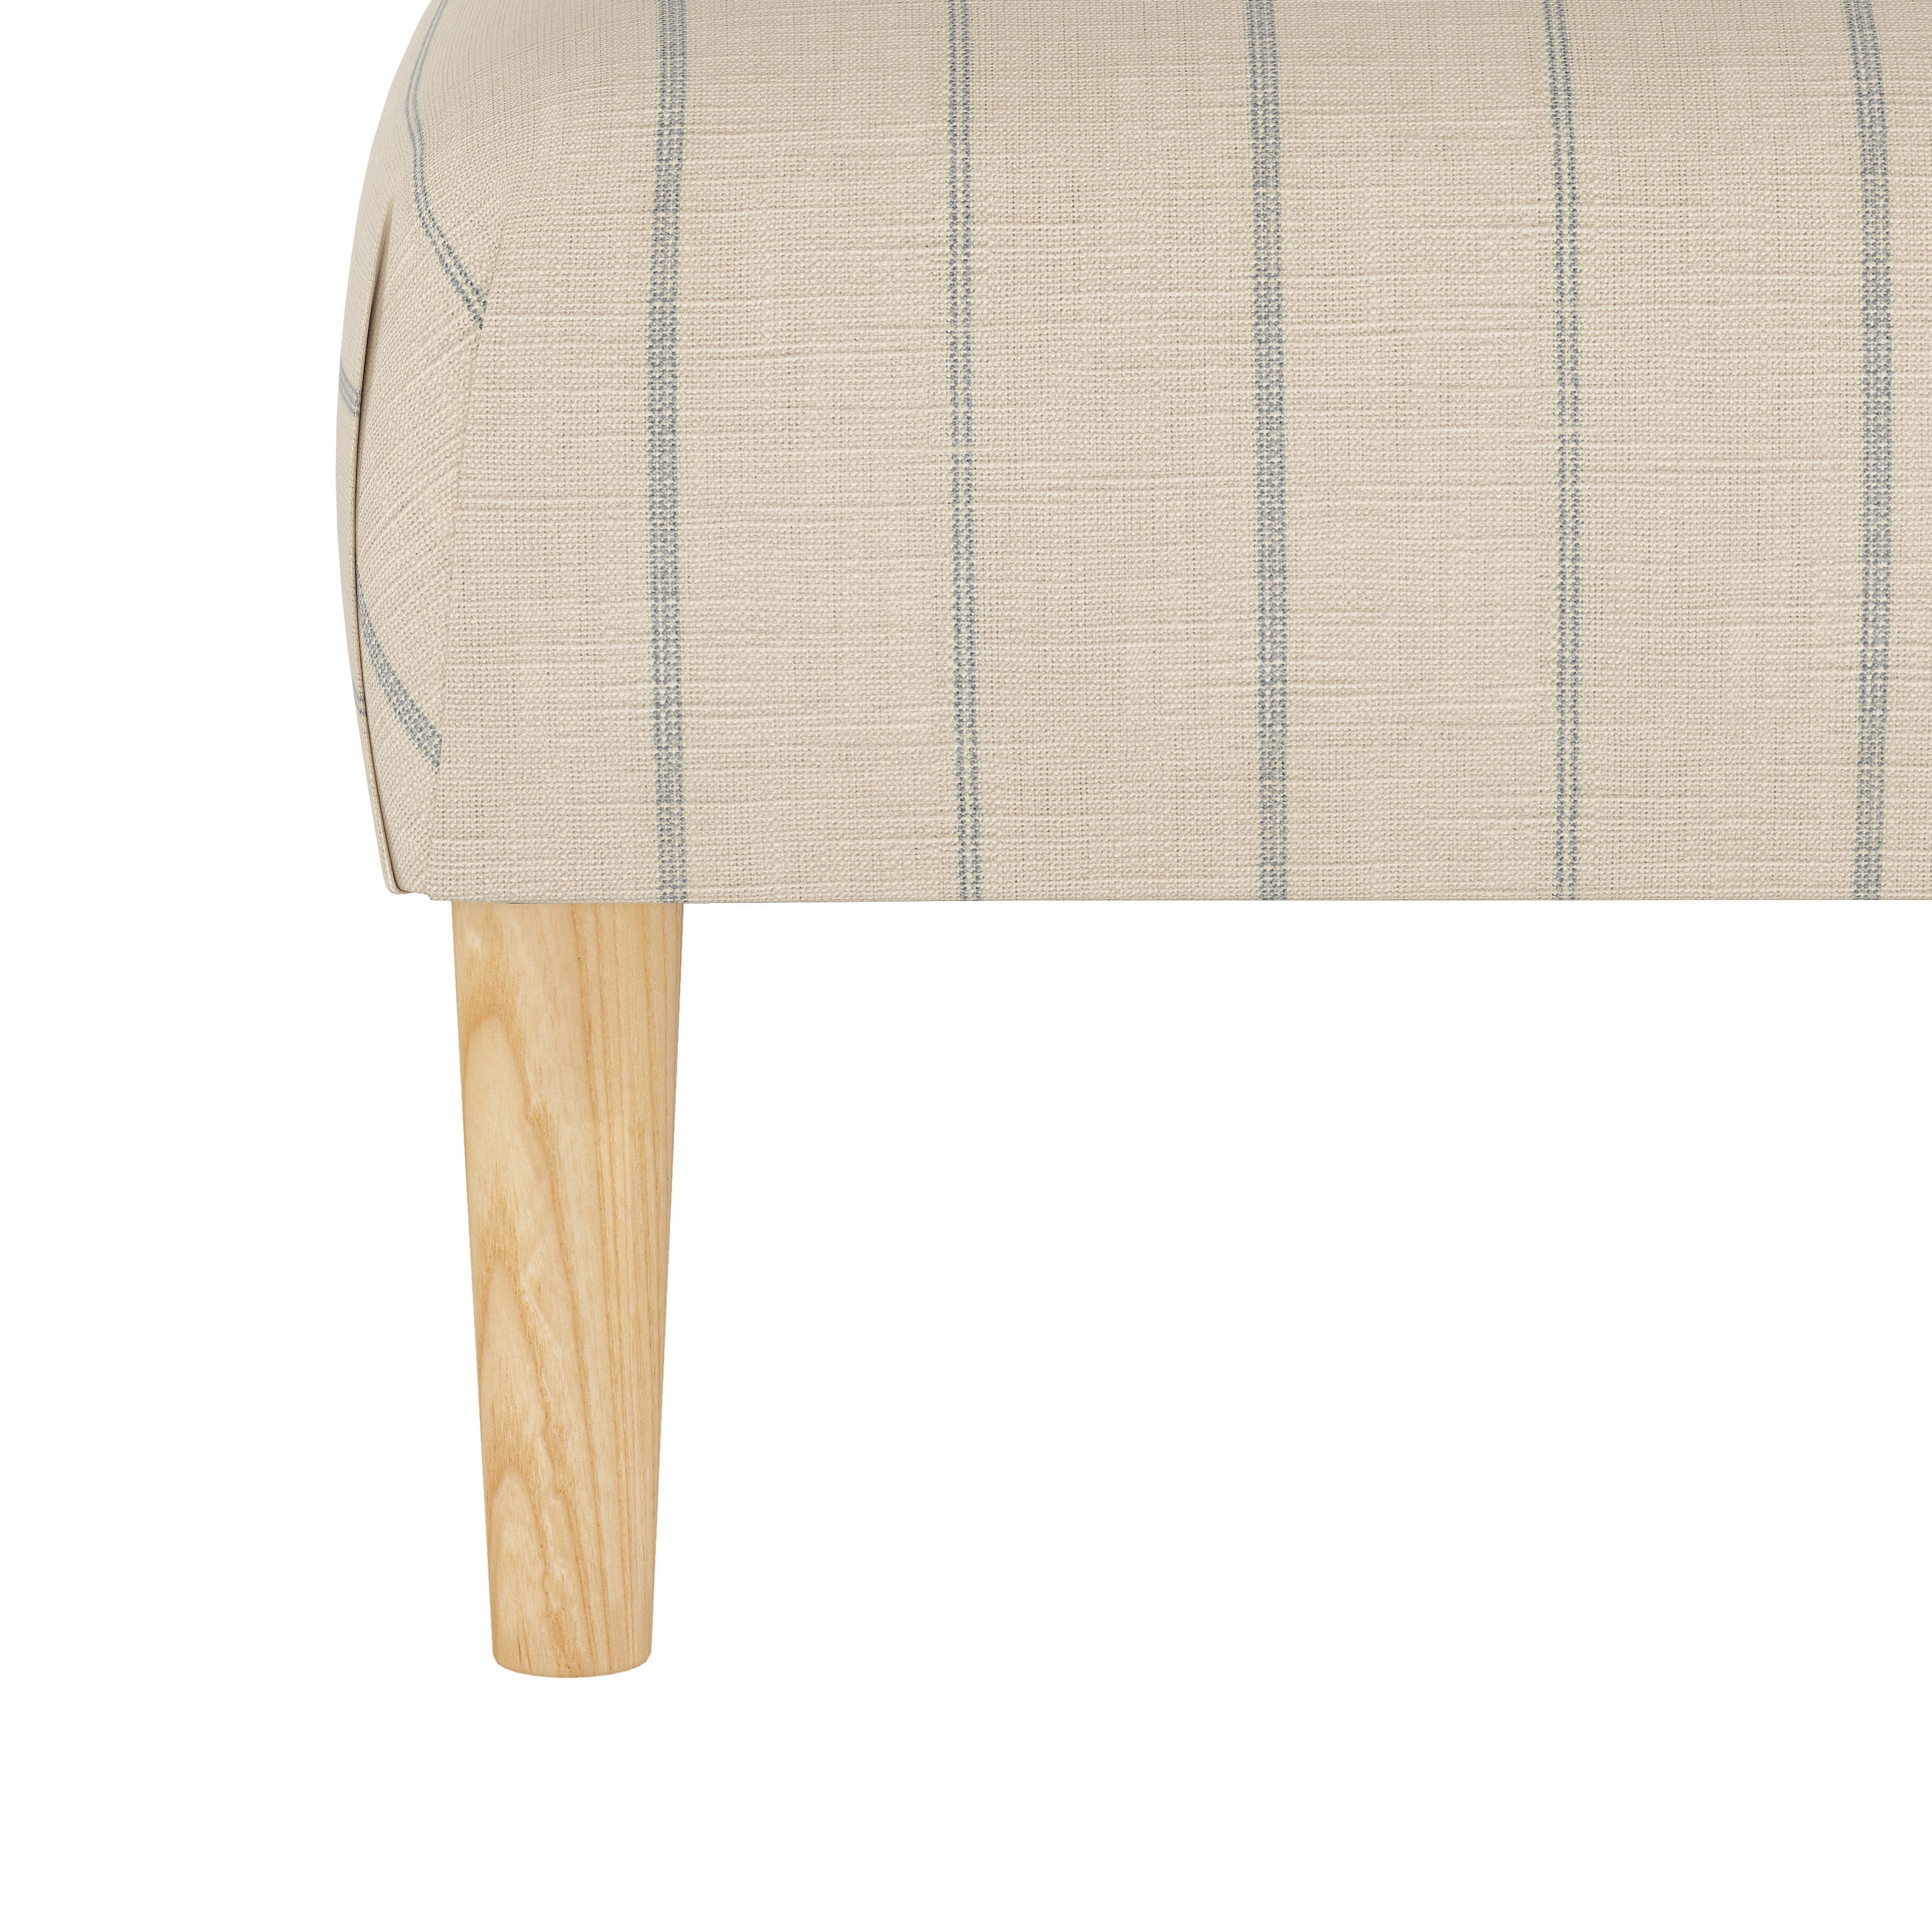 Algren Cocktail Ottoman with Cone Legs in Fritz Sky - Image 2